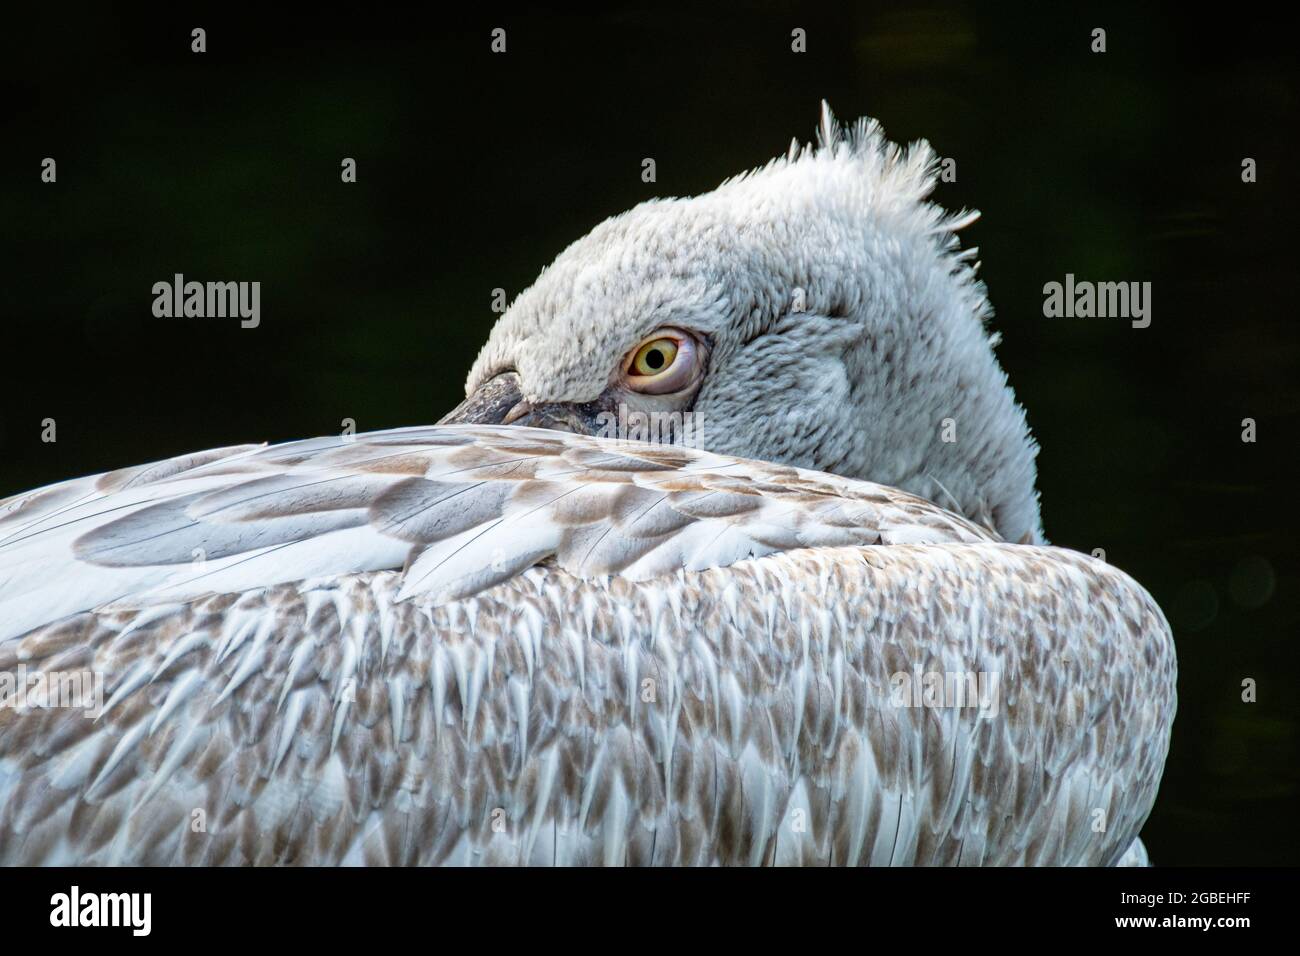 A close up of a resting Dalmatian Pelican against dark background Stock Photo